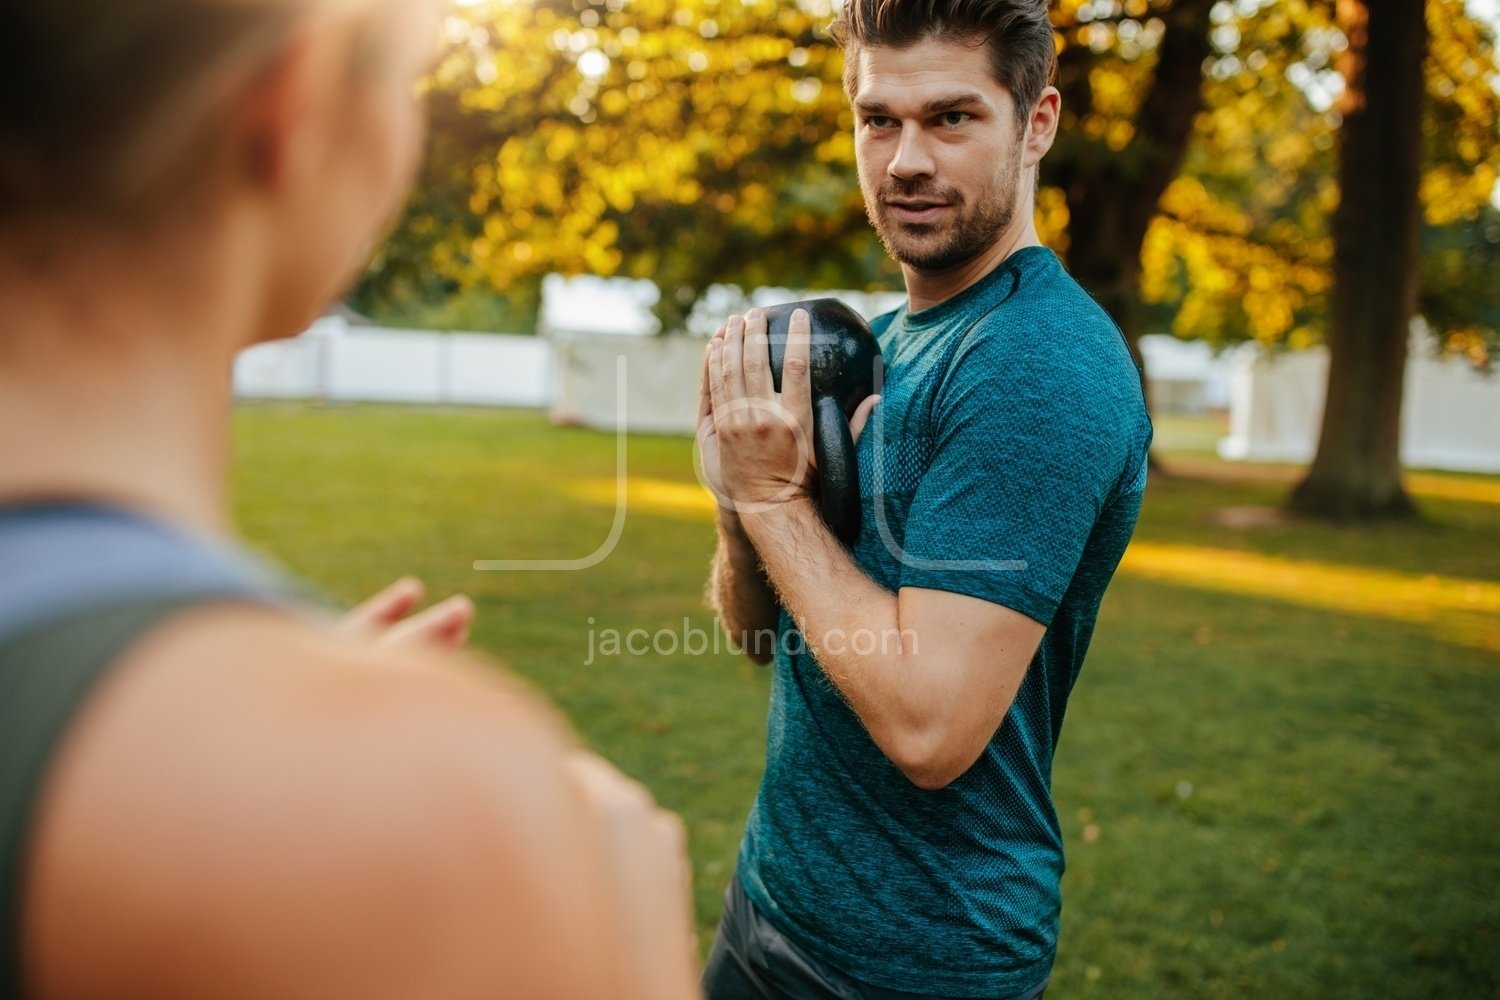 Kettlebell Workout – Jacob Lund Photography Store- premium stock photo